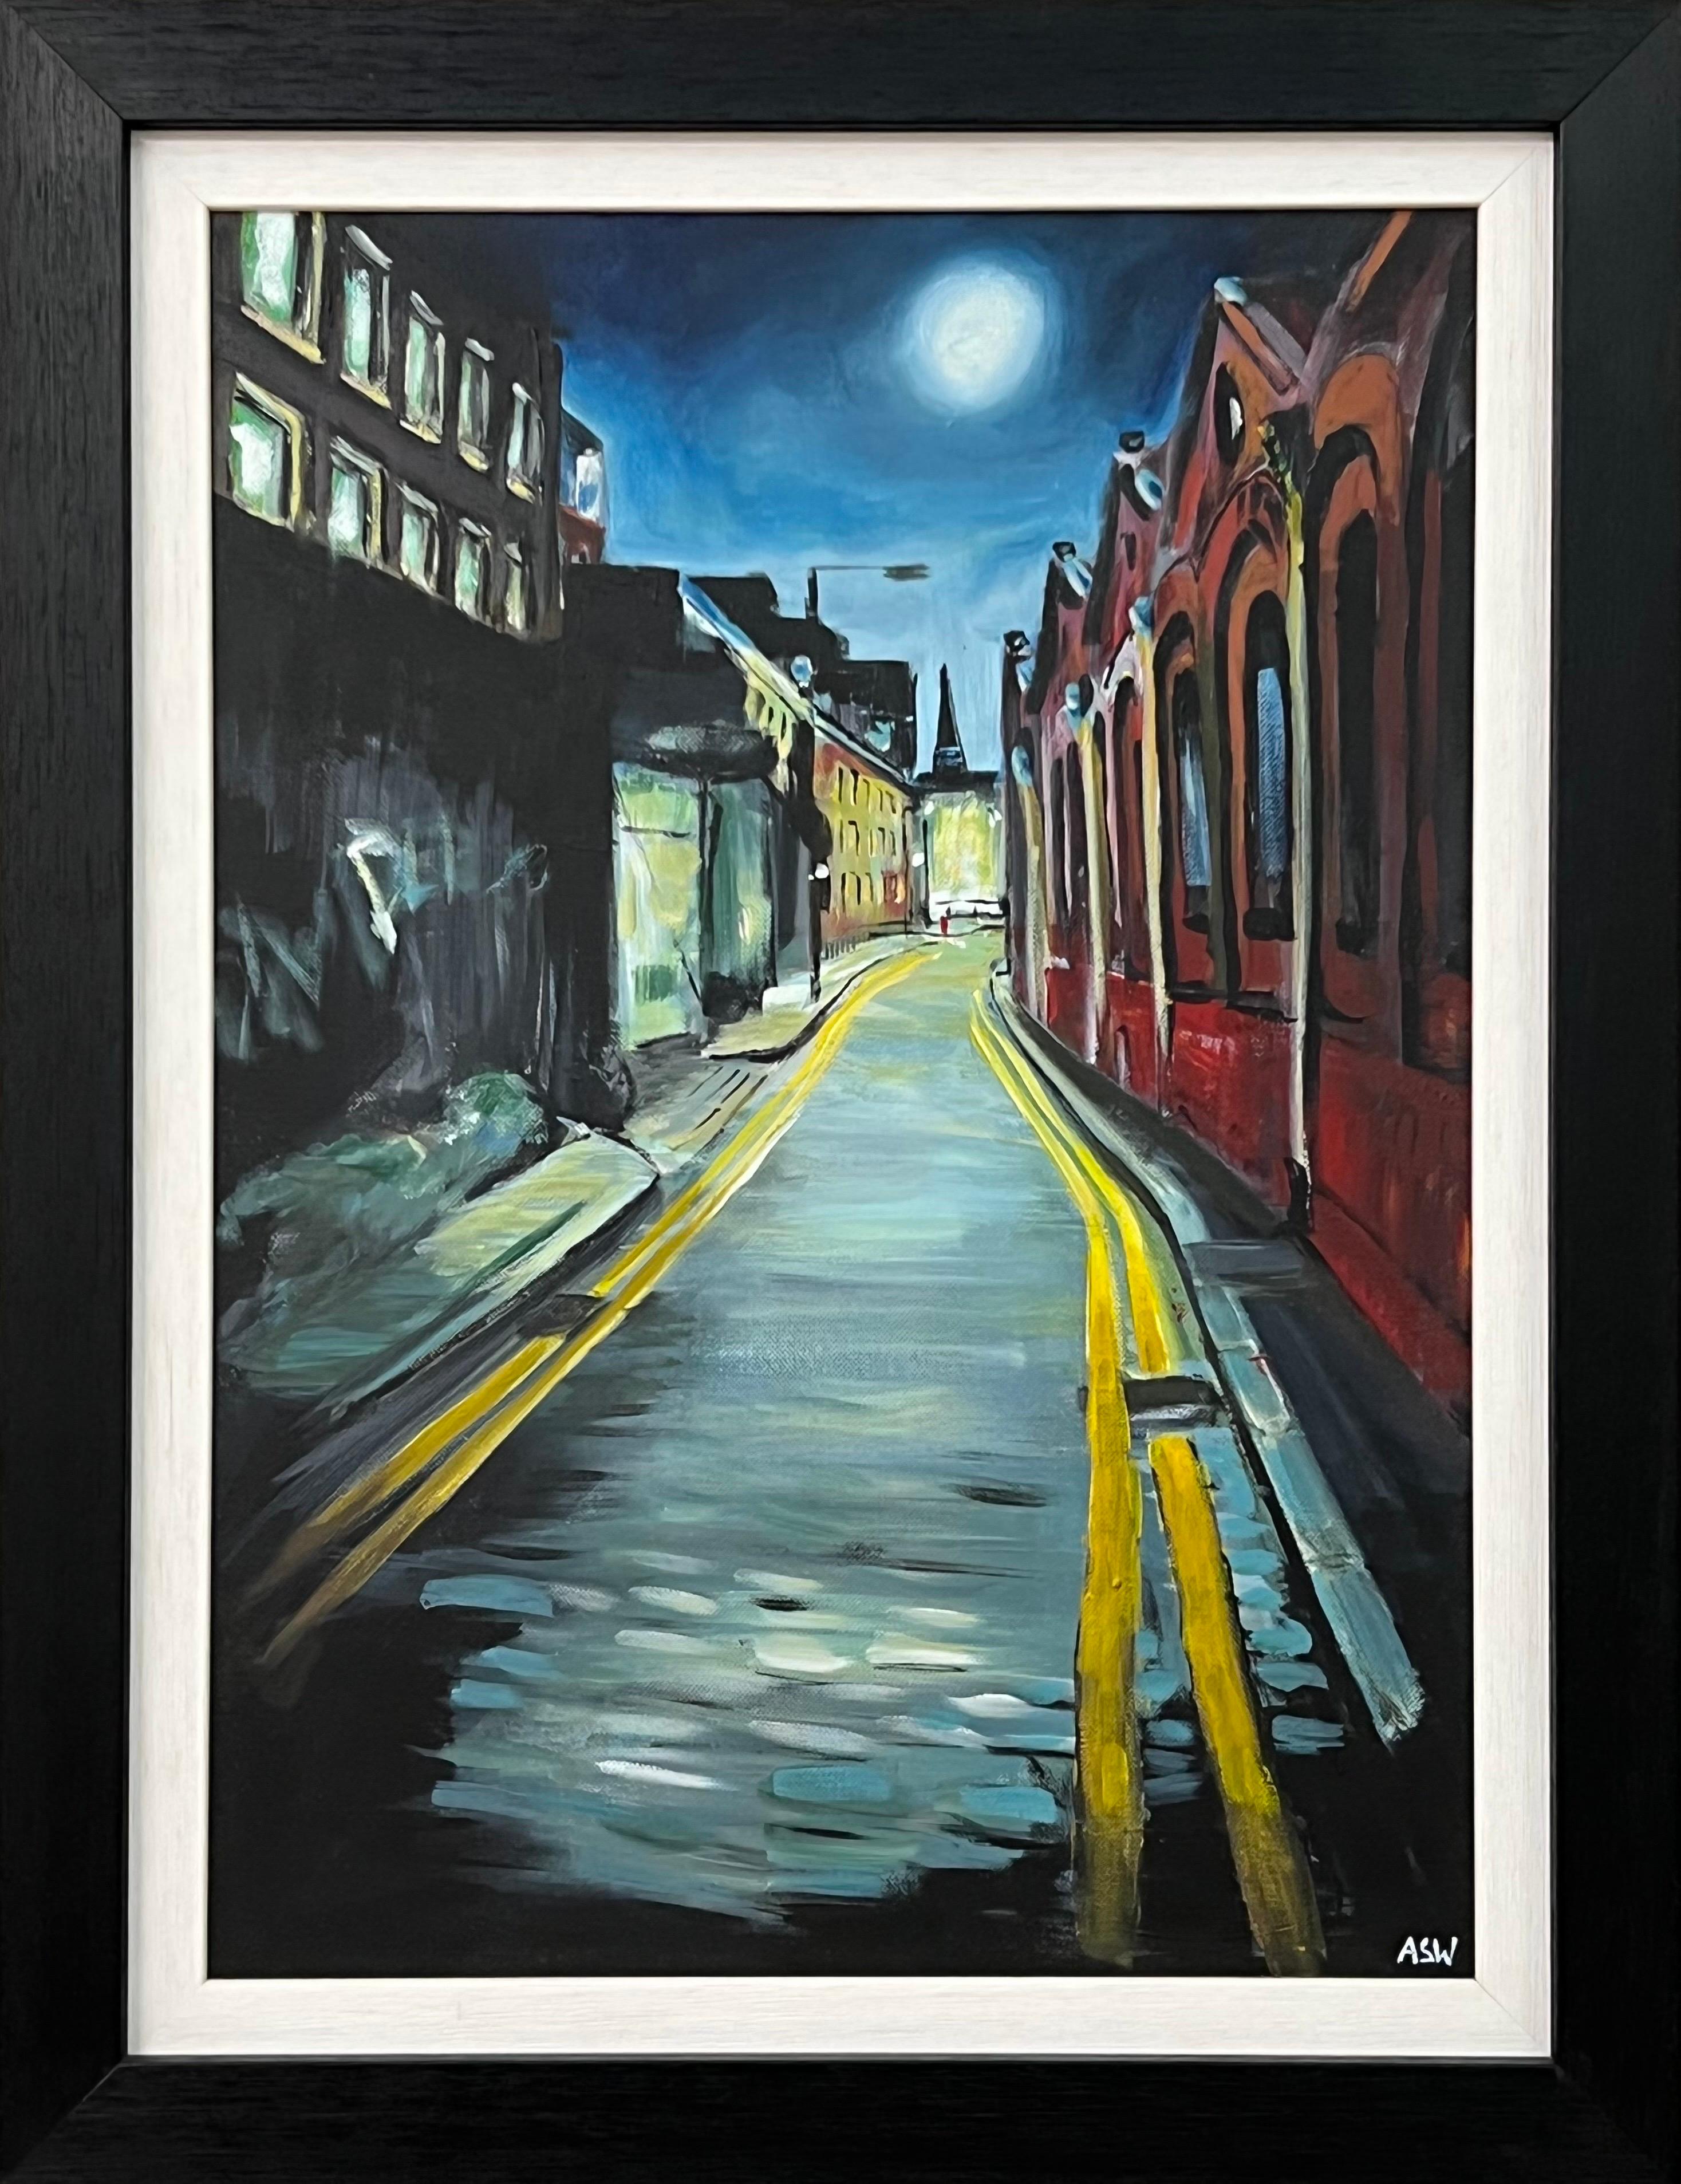 Atmospheric Painting of Street in Whitechapel London City by British Artist